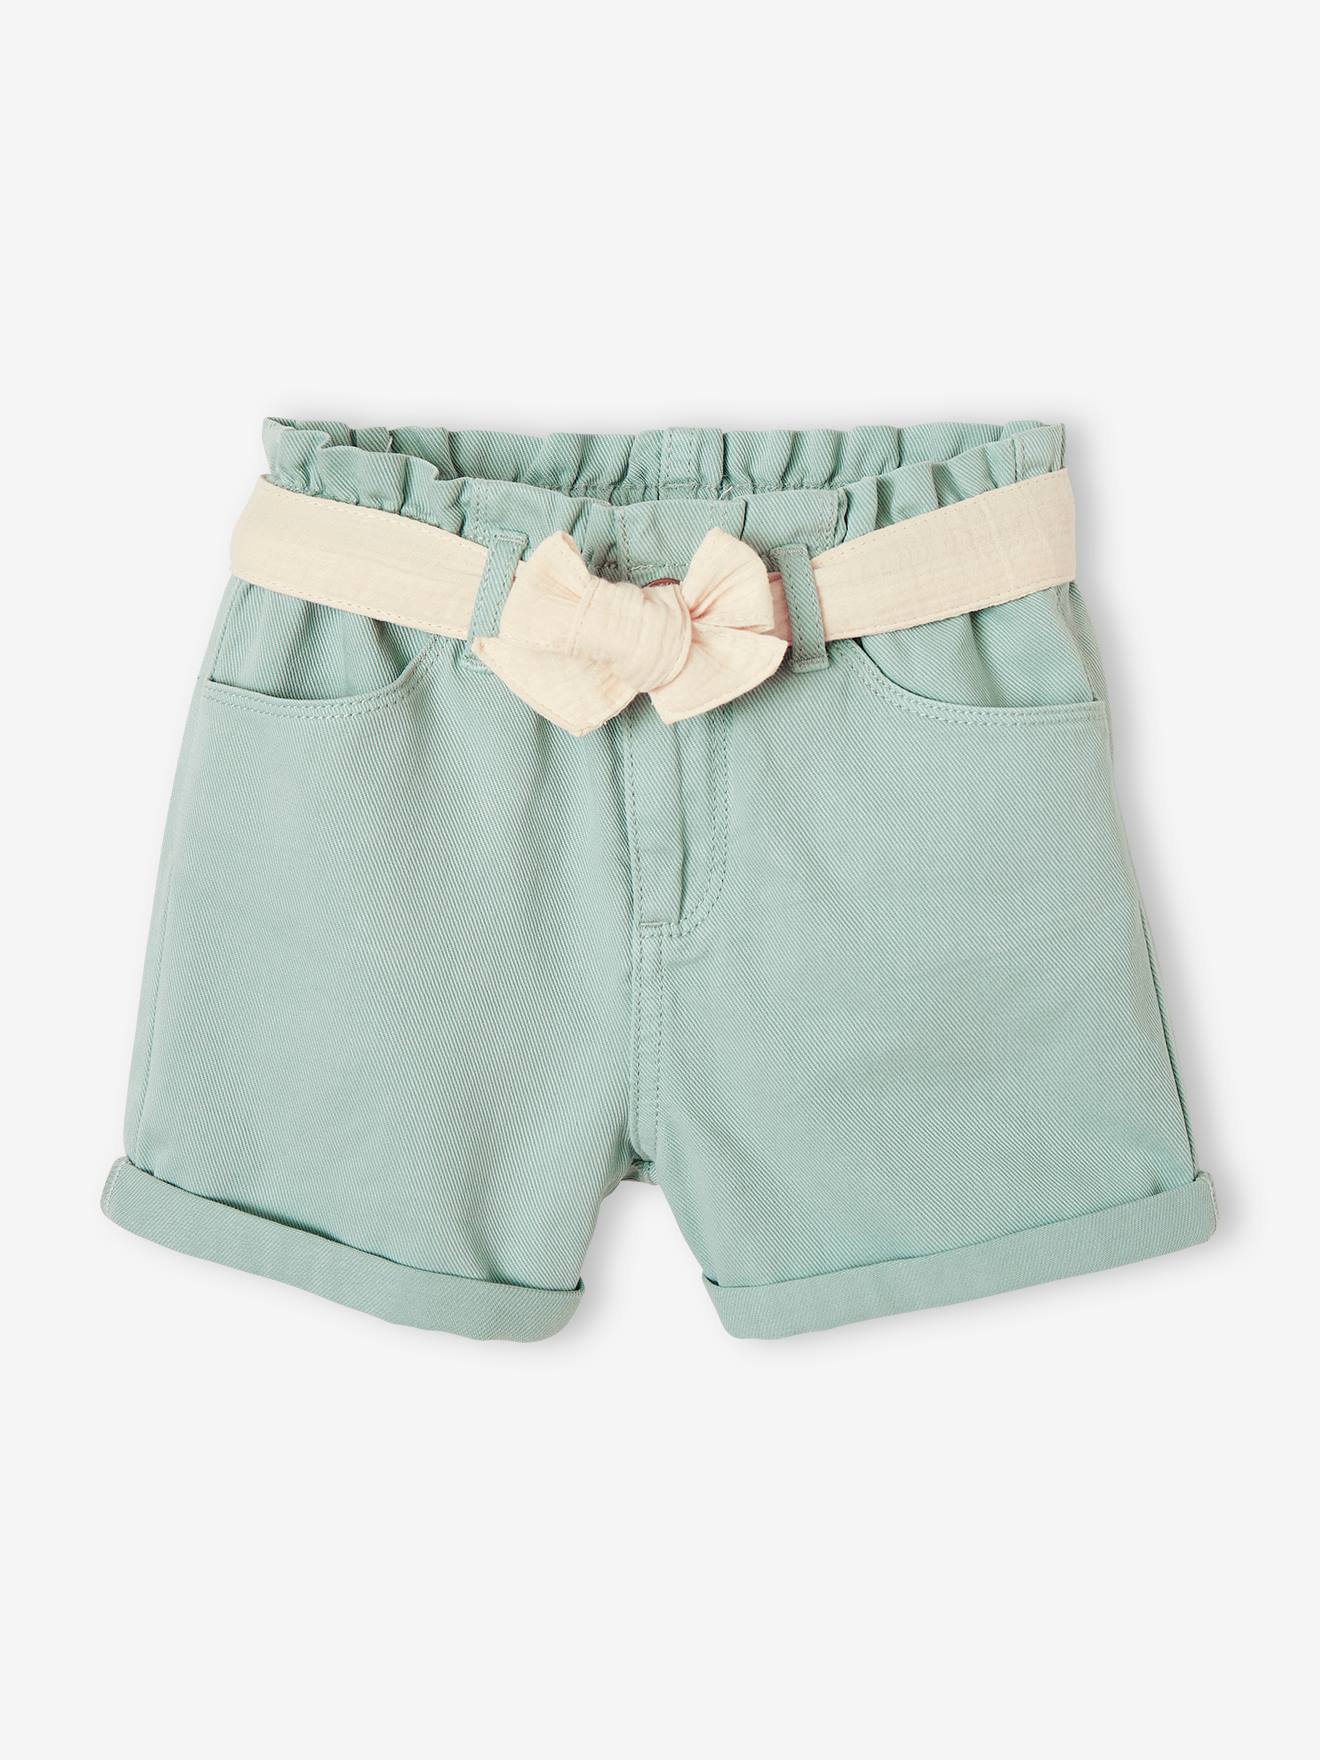 Paperbag Shorts in Cotton Gauze, with Belt, for Girls aqua green